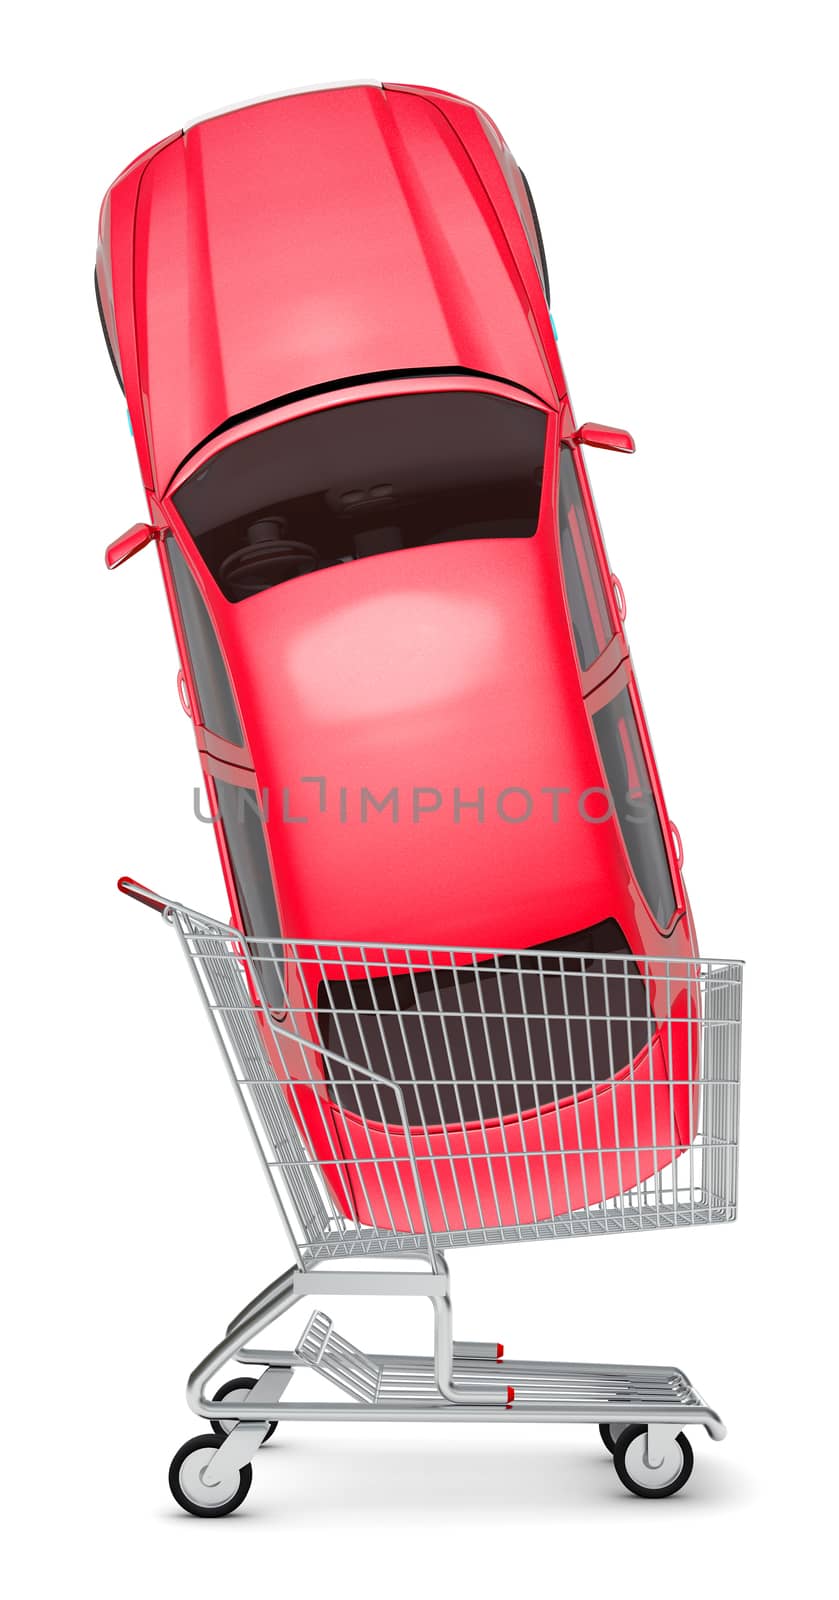 Red car in shopping cart on isolated white background